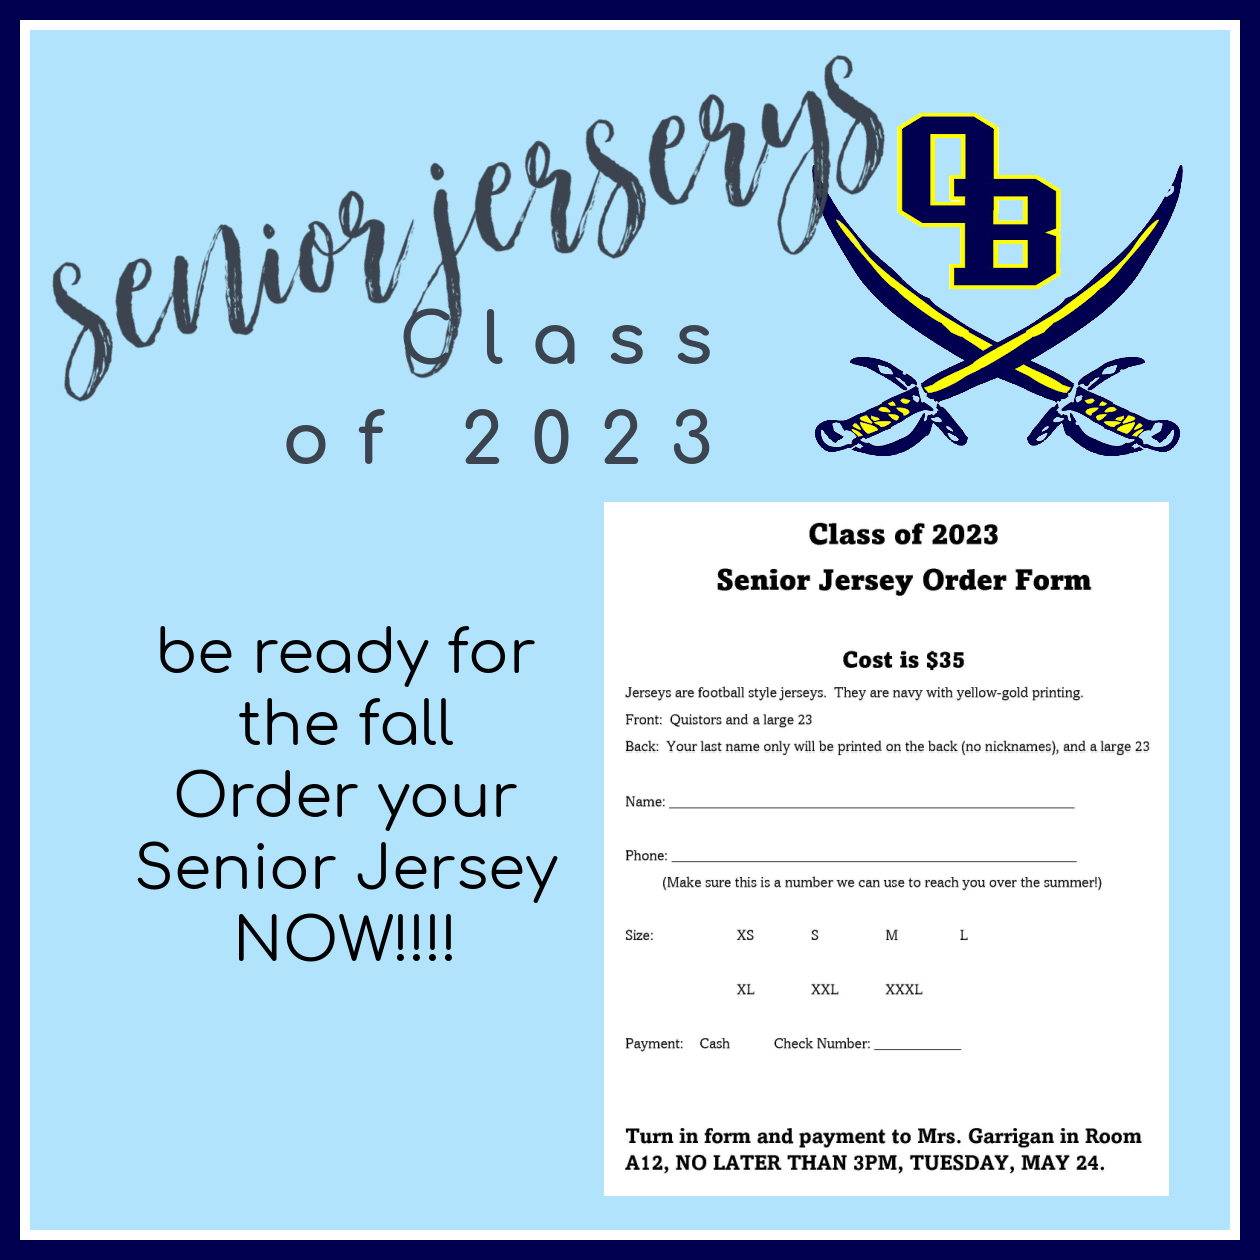 Class of 2023 Jersey Order Information